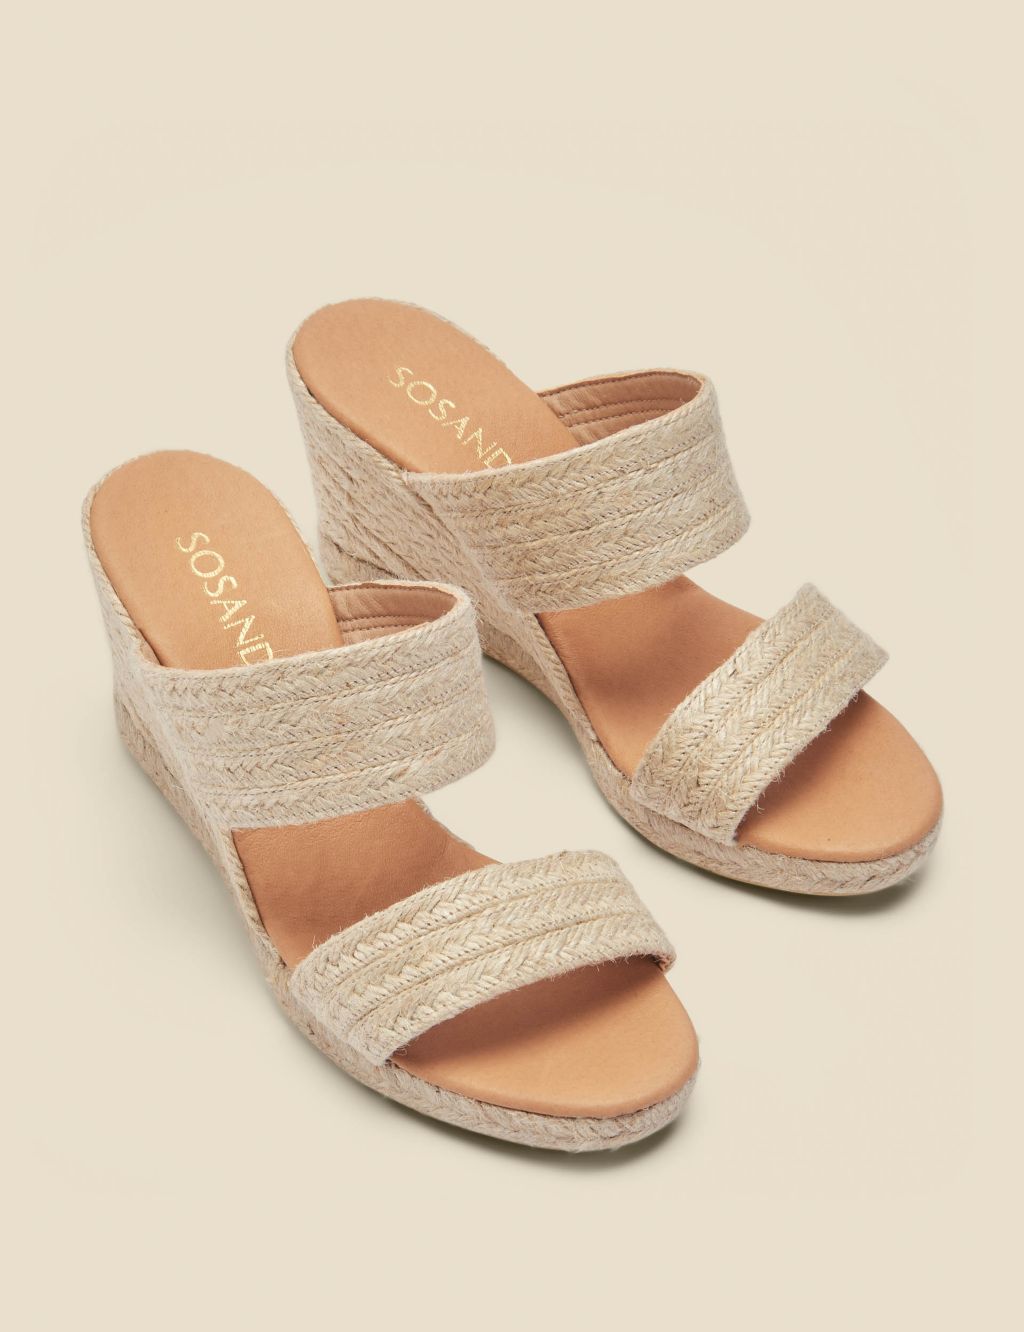 Woven Wedge Espadrille Mules image 2